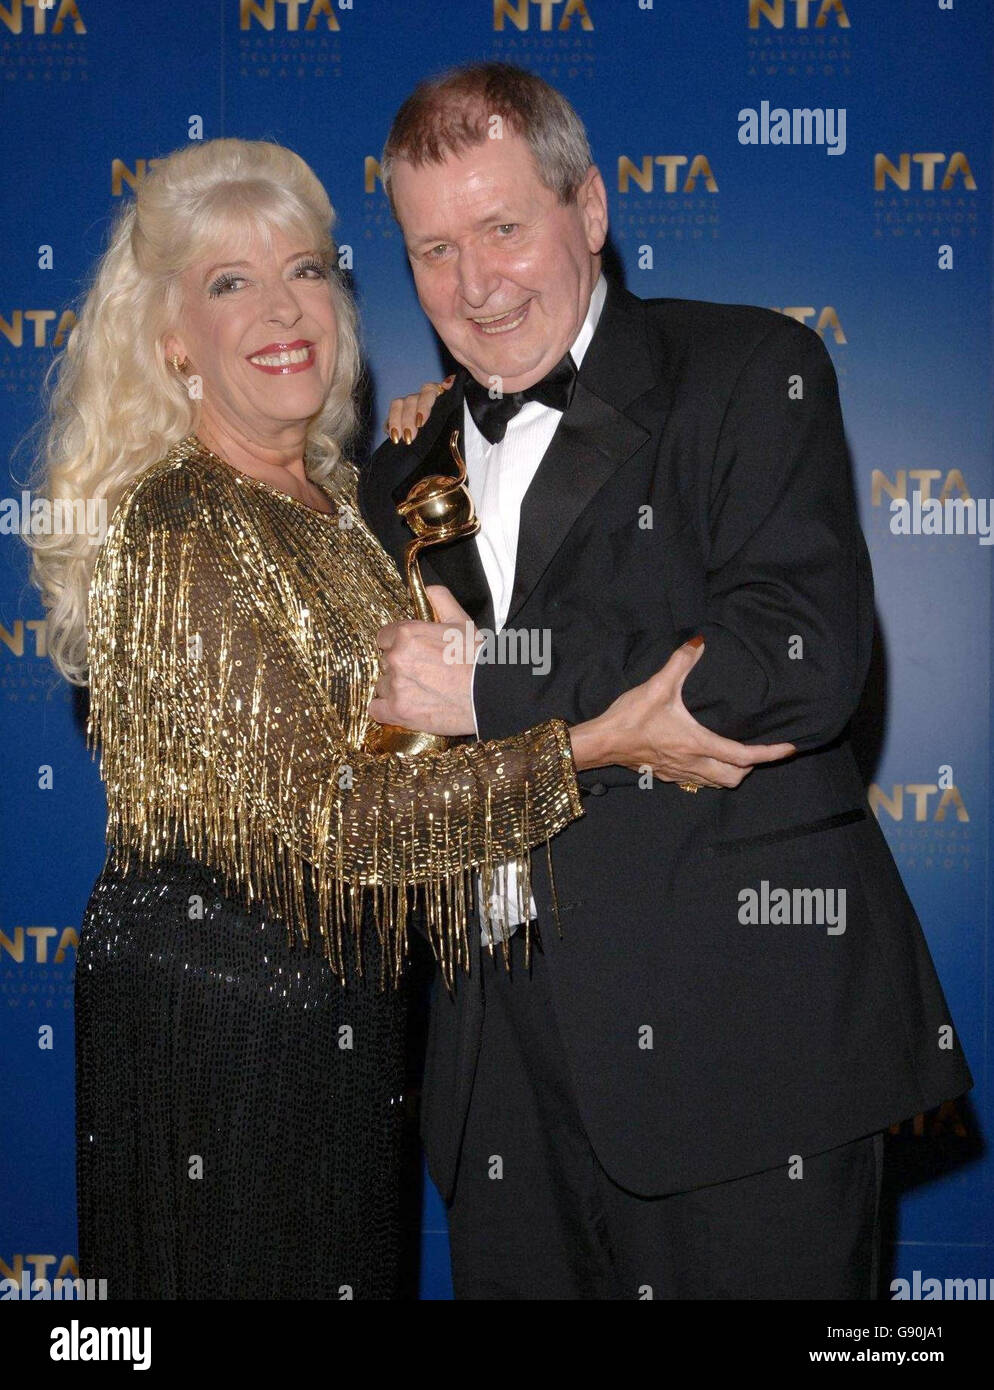 Tony Warren, creator of Coronation Street with the TV Lanmark award he received from actress Julie Goodyear at the National Television Awards 2005 (NTA), at the Royal Albert Hall, central London, Tuesday 25 October 2005. See PA story SHOWBIZ Awards. PRESS ASSOCIATION Photo. Photo credit should read: Ian West/PA Stock Photo